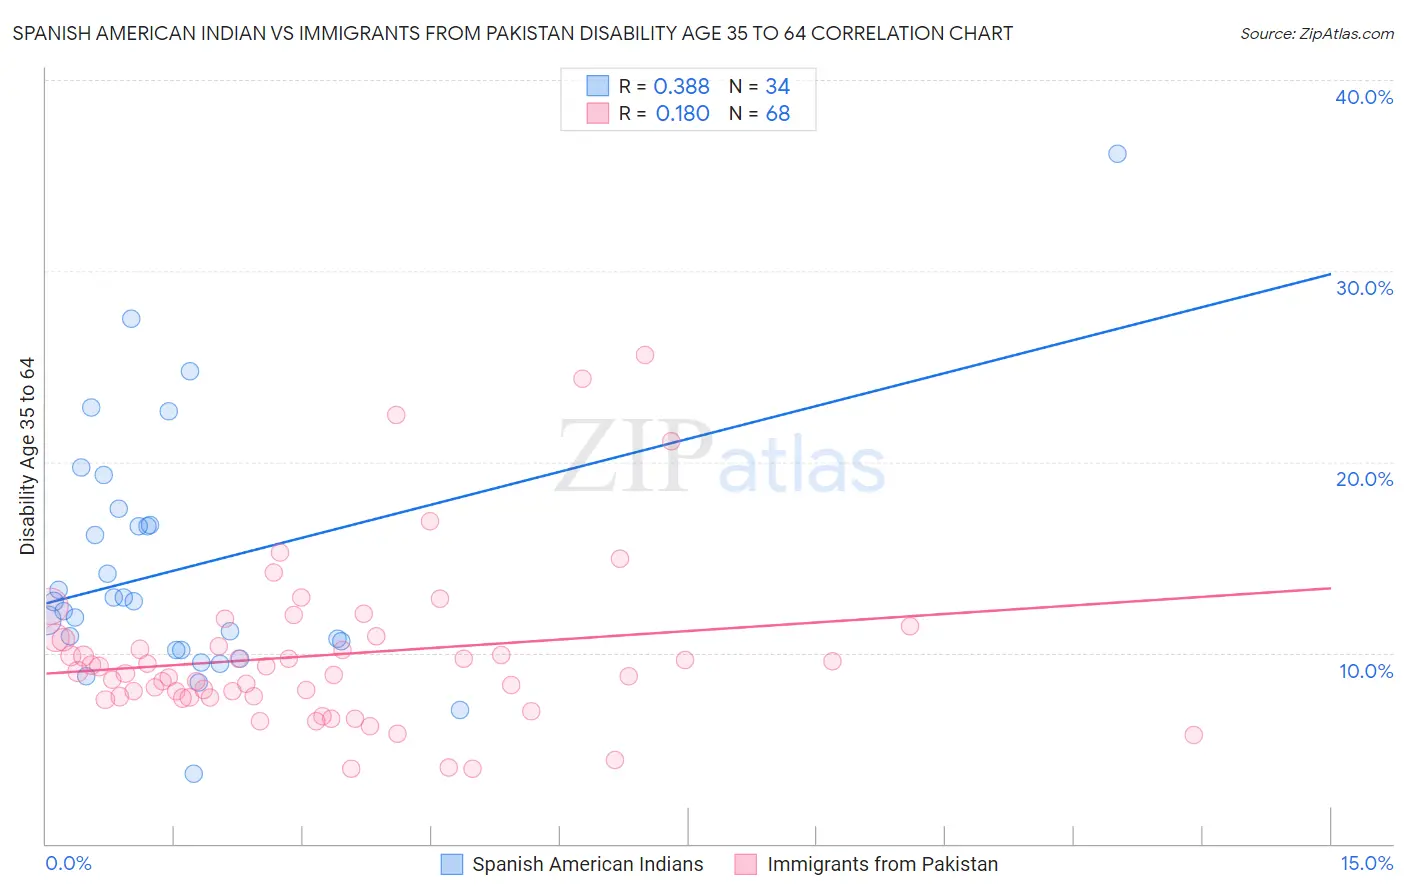 Spanish American Indian vs Immigrants from Pakistan Disability Age 35 to 64